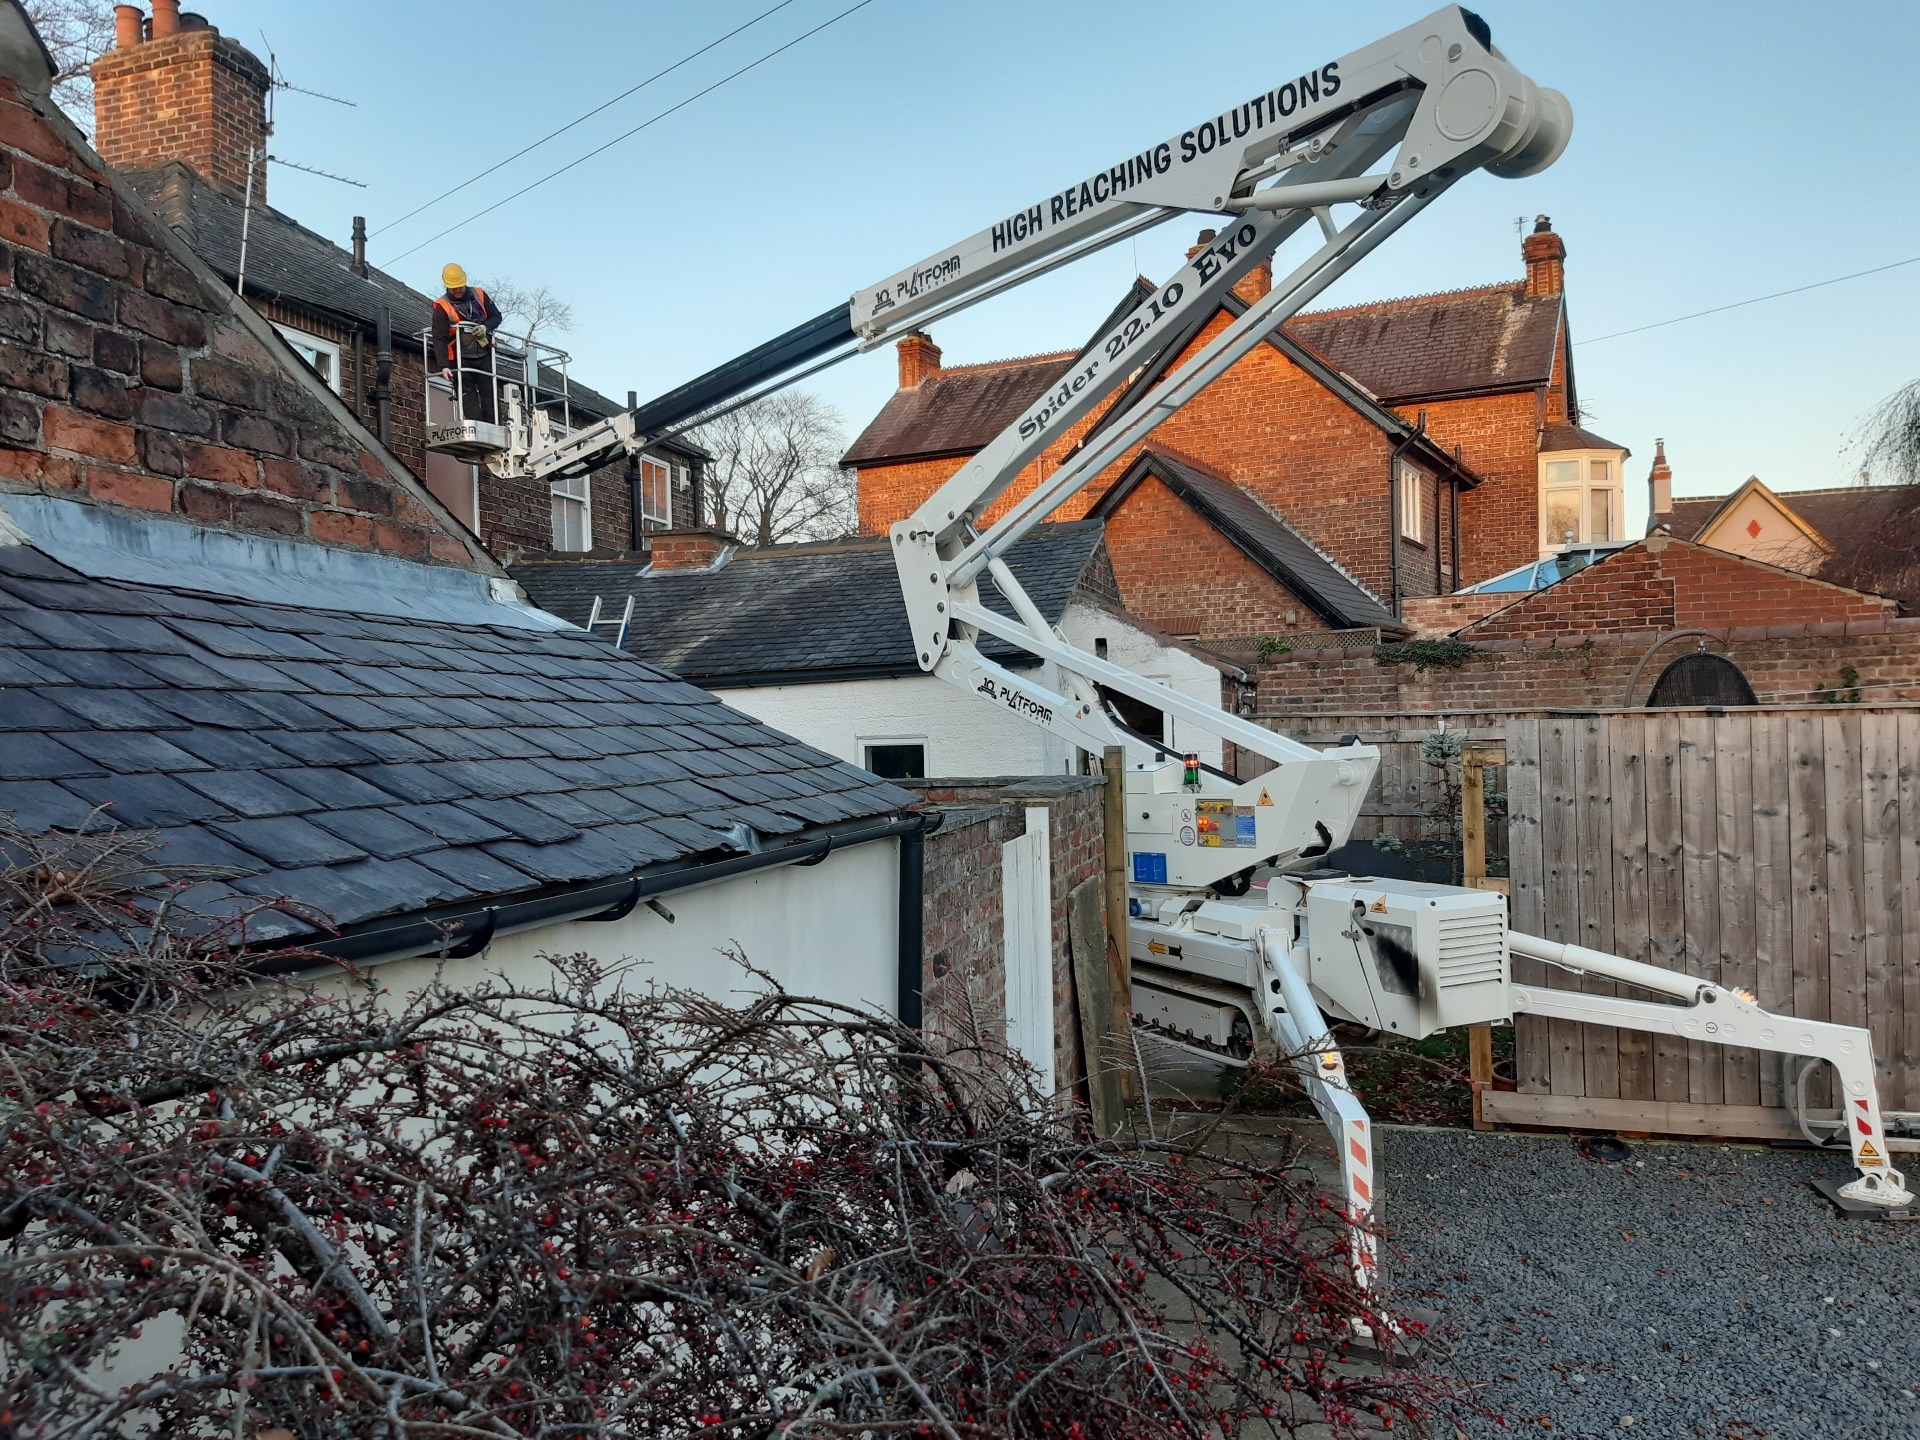 Tracked spider cherry picker set in middle of fence reaching over roof.